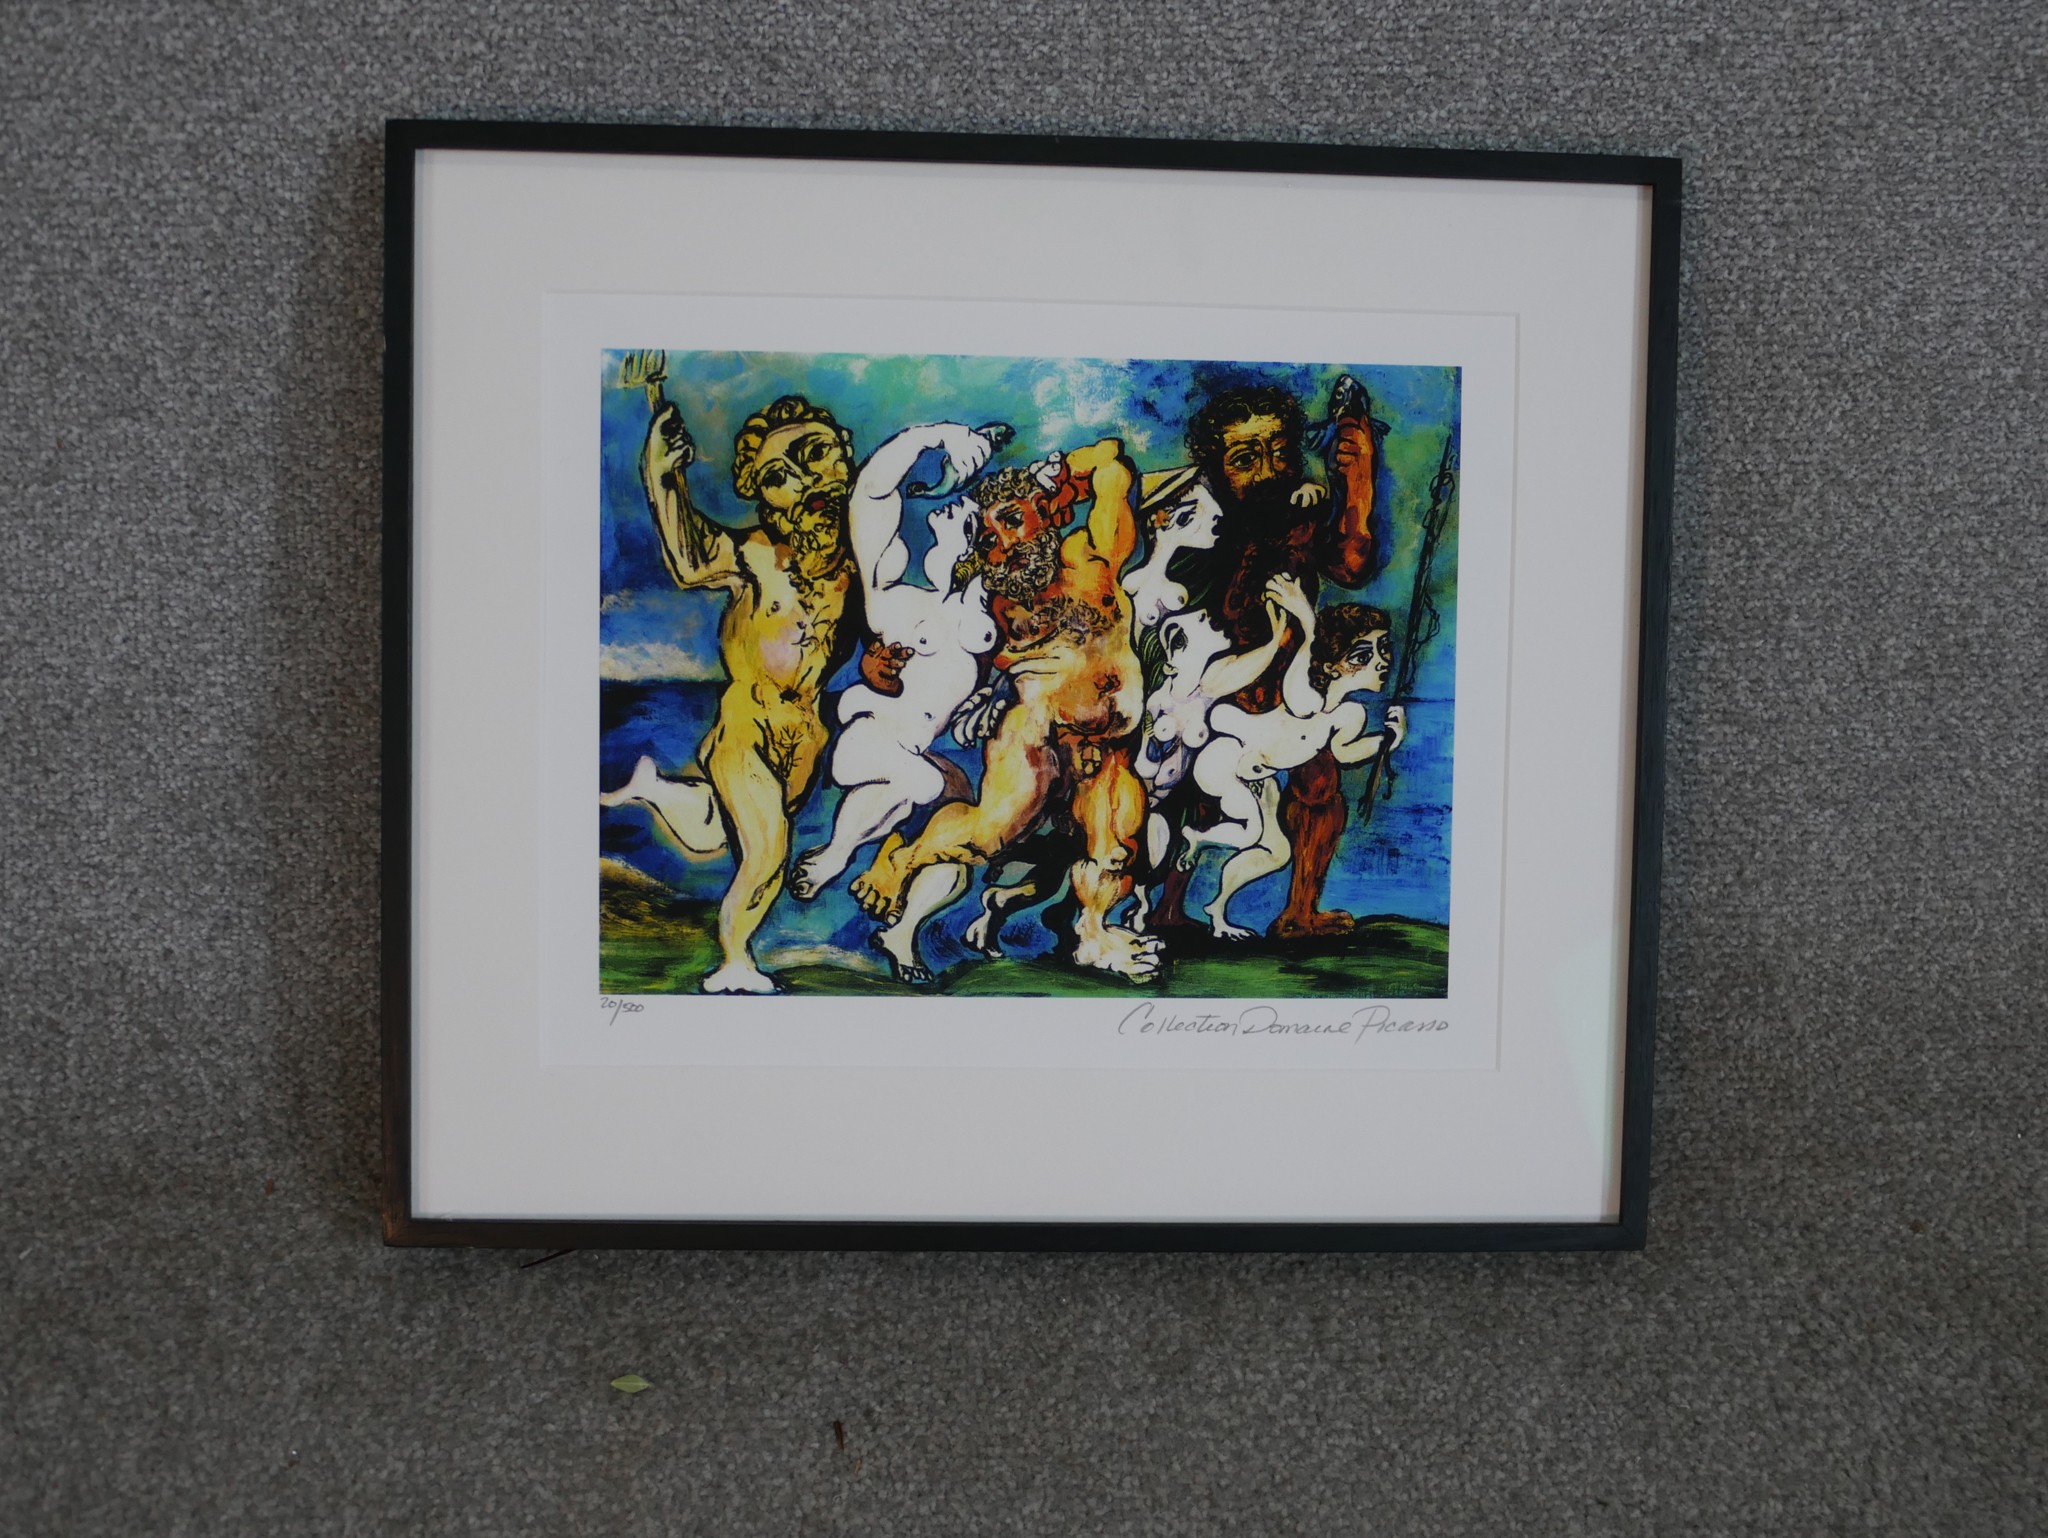 After Pablo Picasso (1881-1973), Silenus Dancing in Company, a coloured limited Collection Domaine - Image 2 of 5